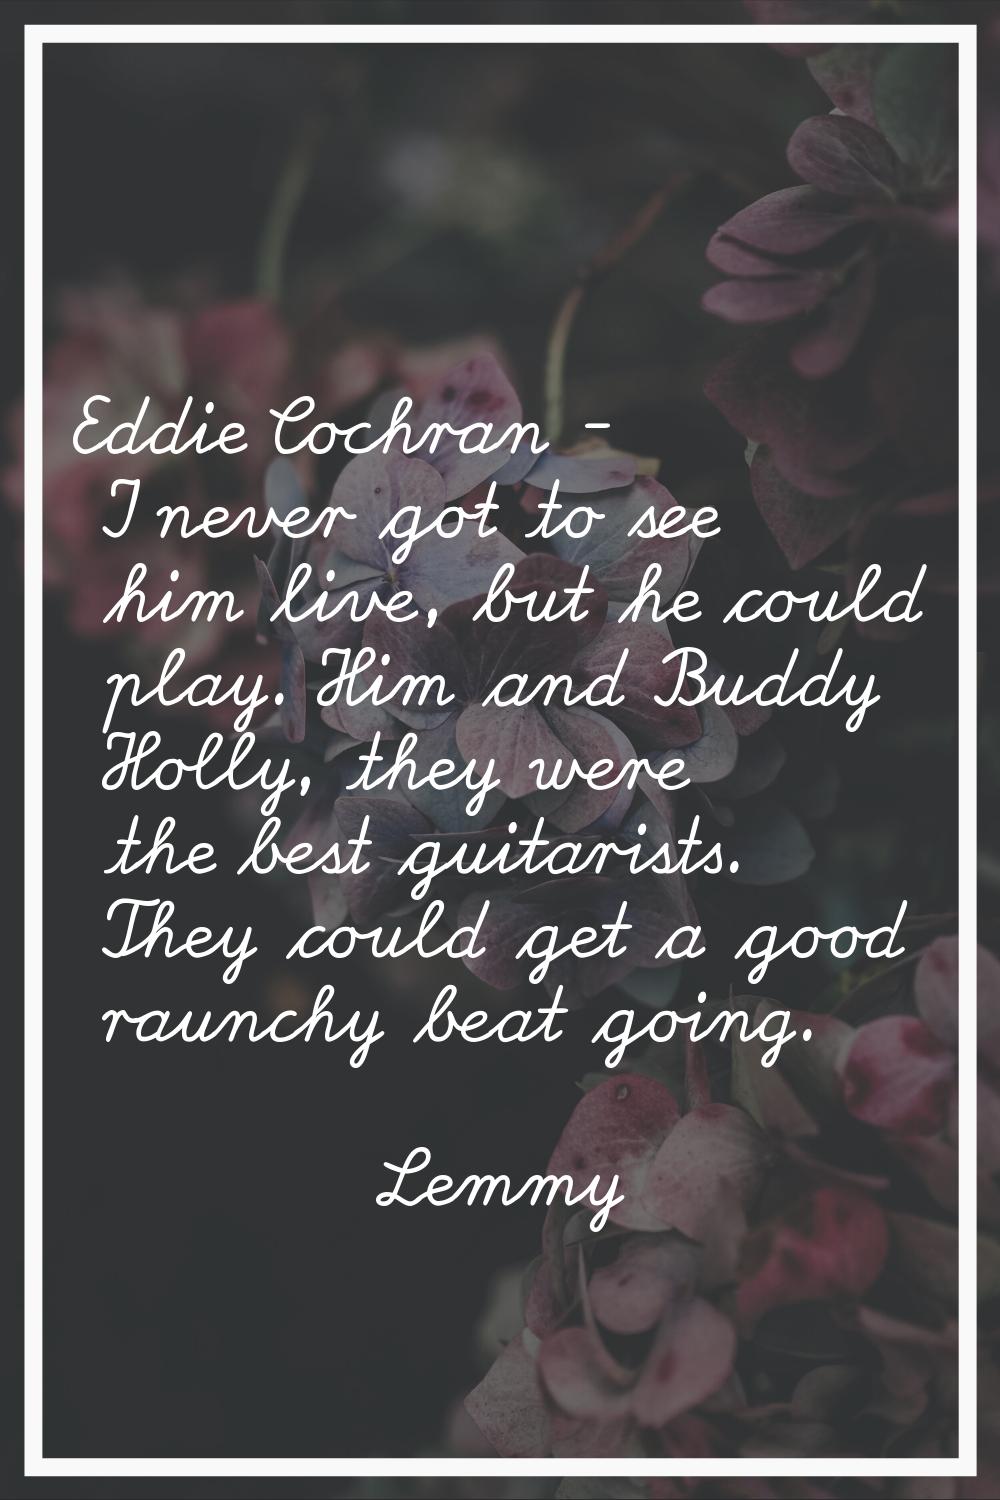 Eddie Cochran - I never got to see him live, but he could play. Him and Buddy Holly, they were the 